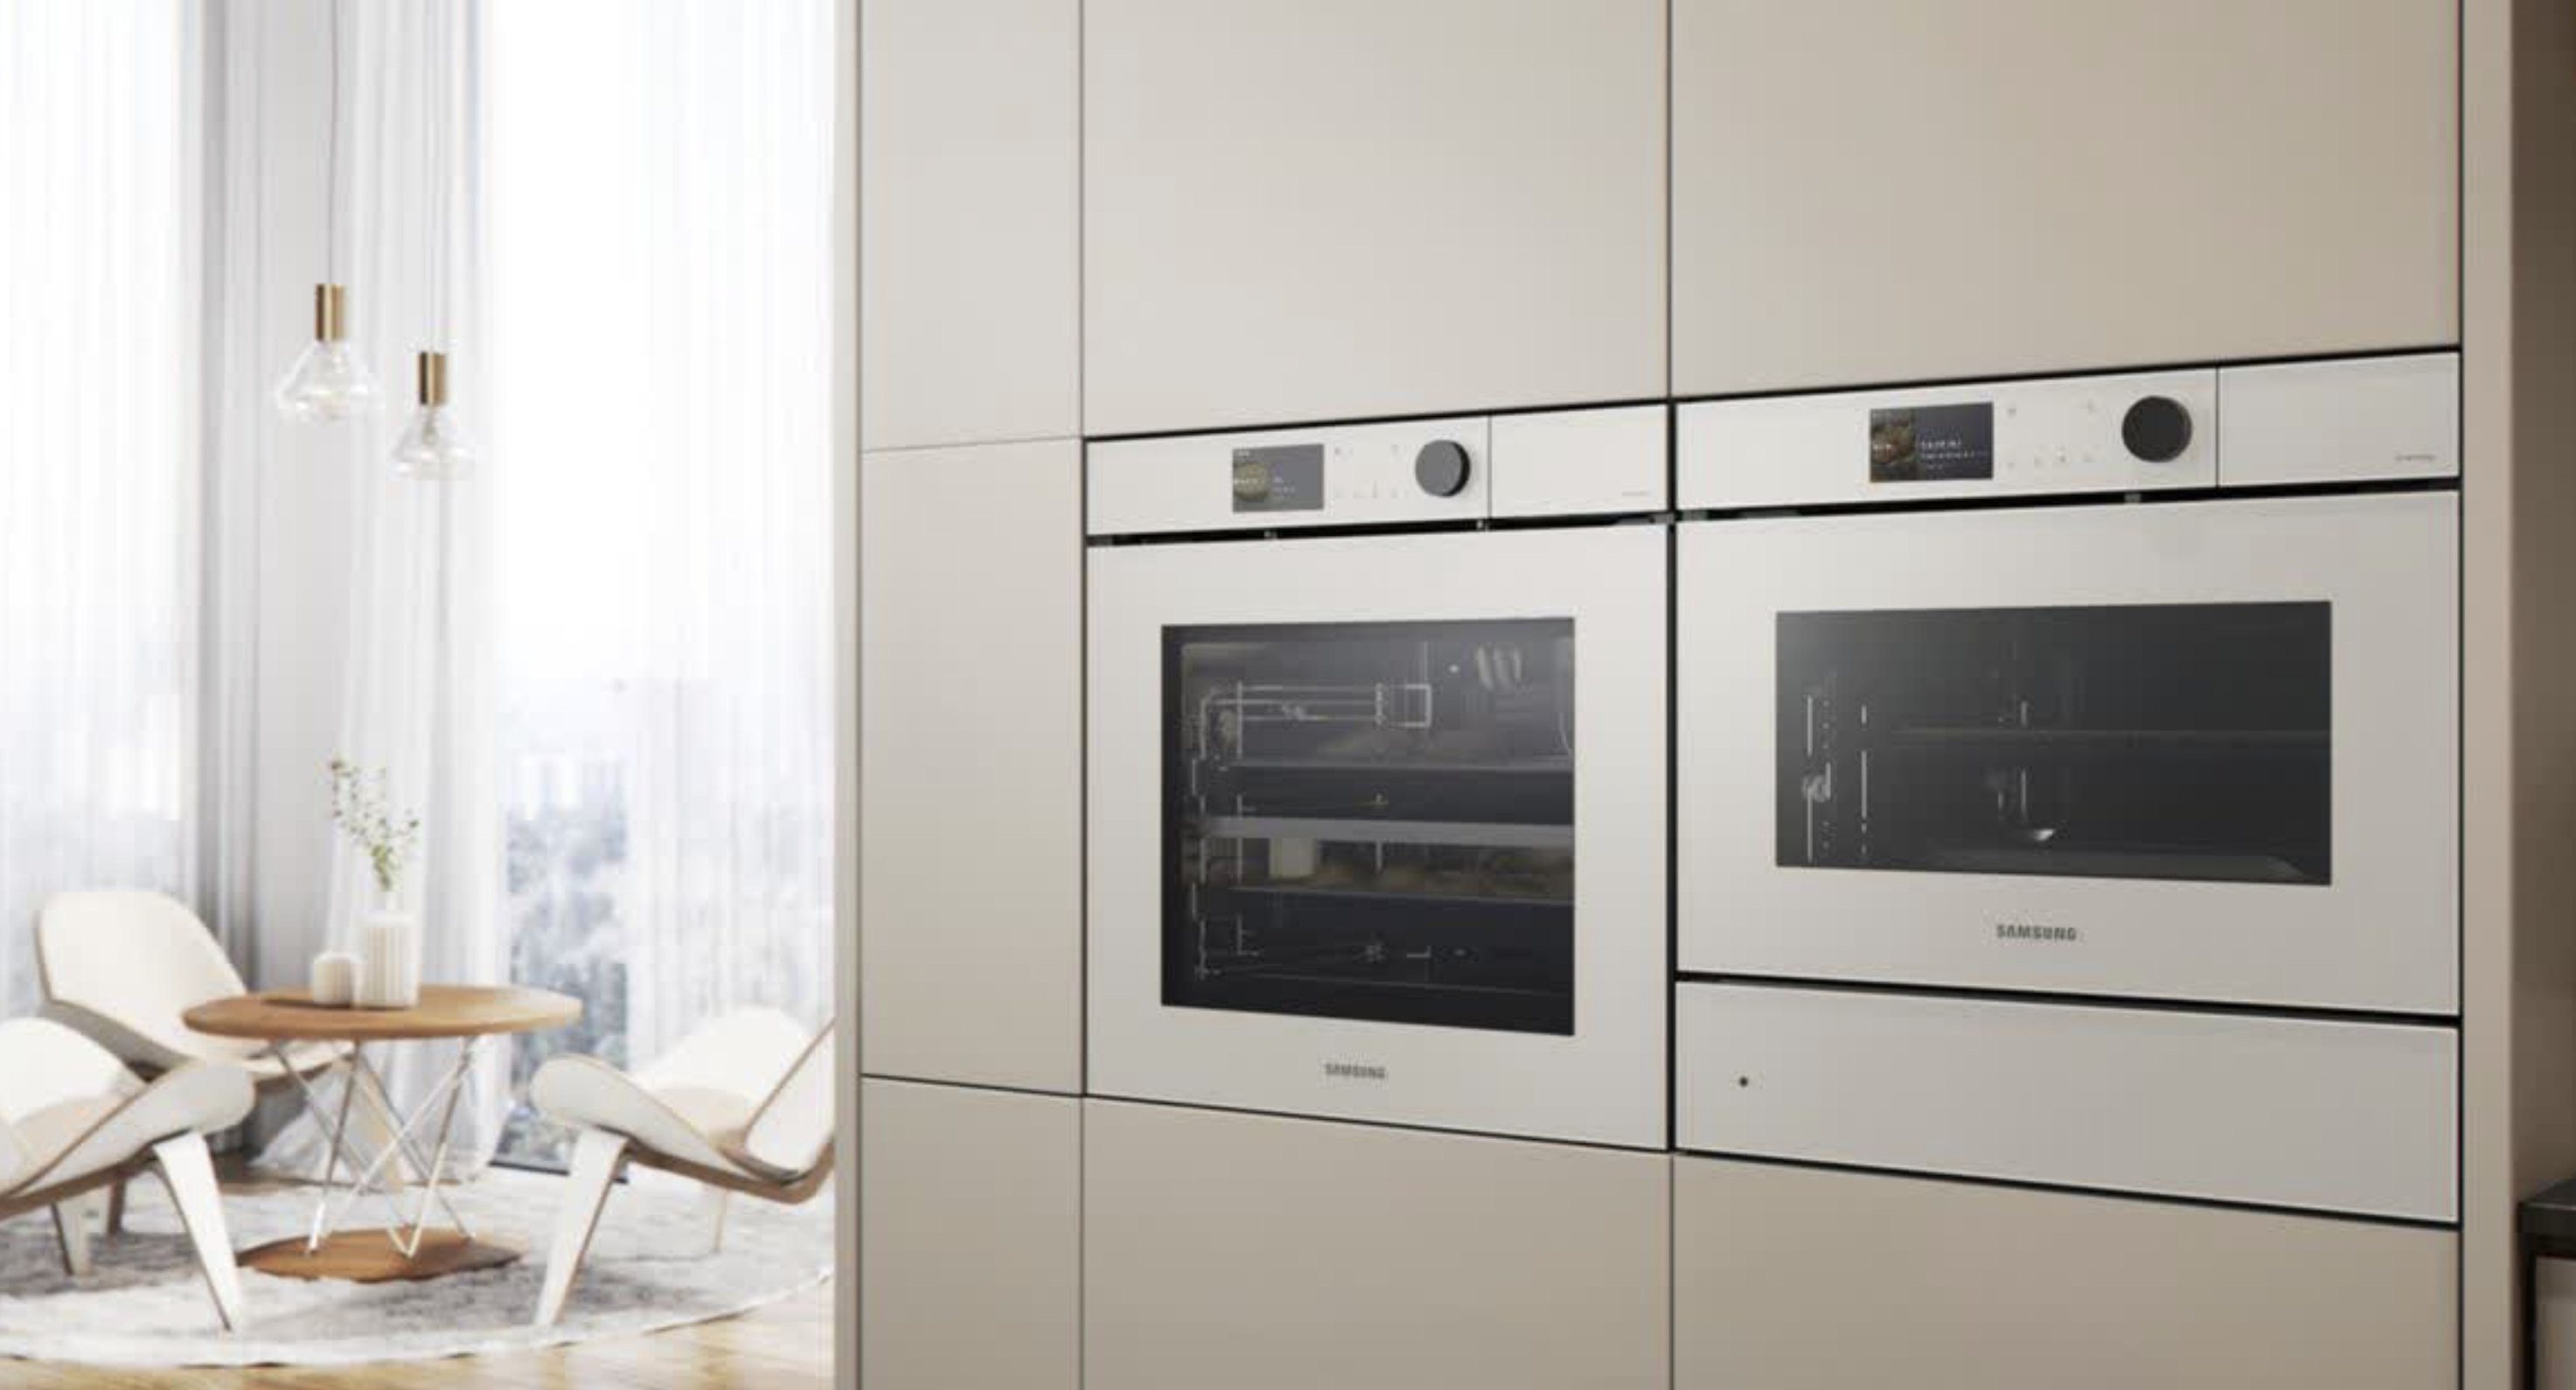 ces-2023-samsung-confirms-new-cooking-appliance-range-for-oz-channelnews